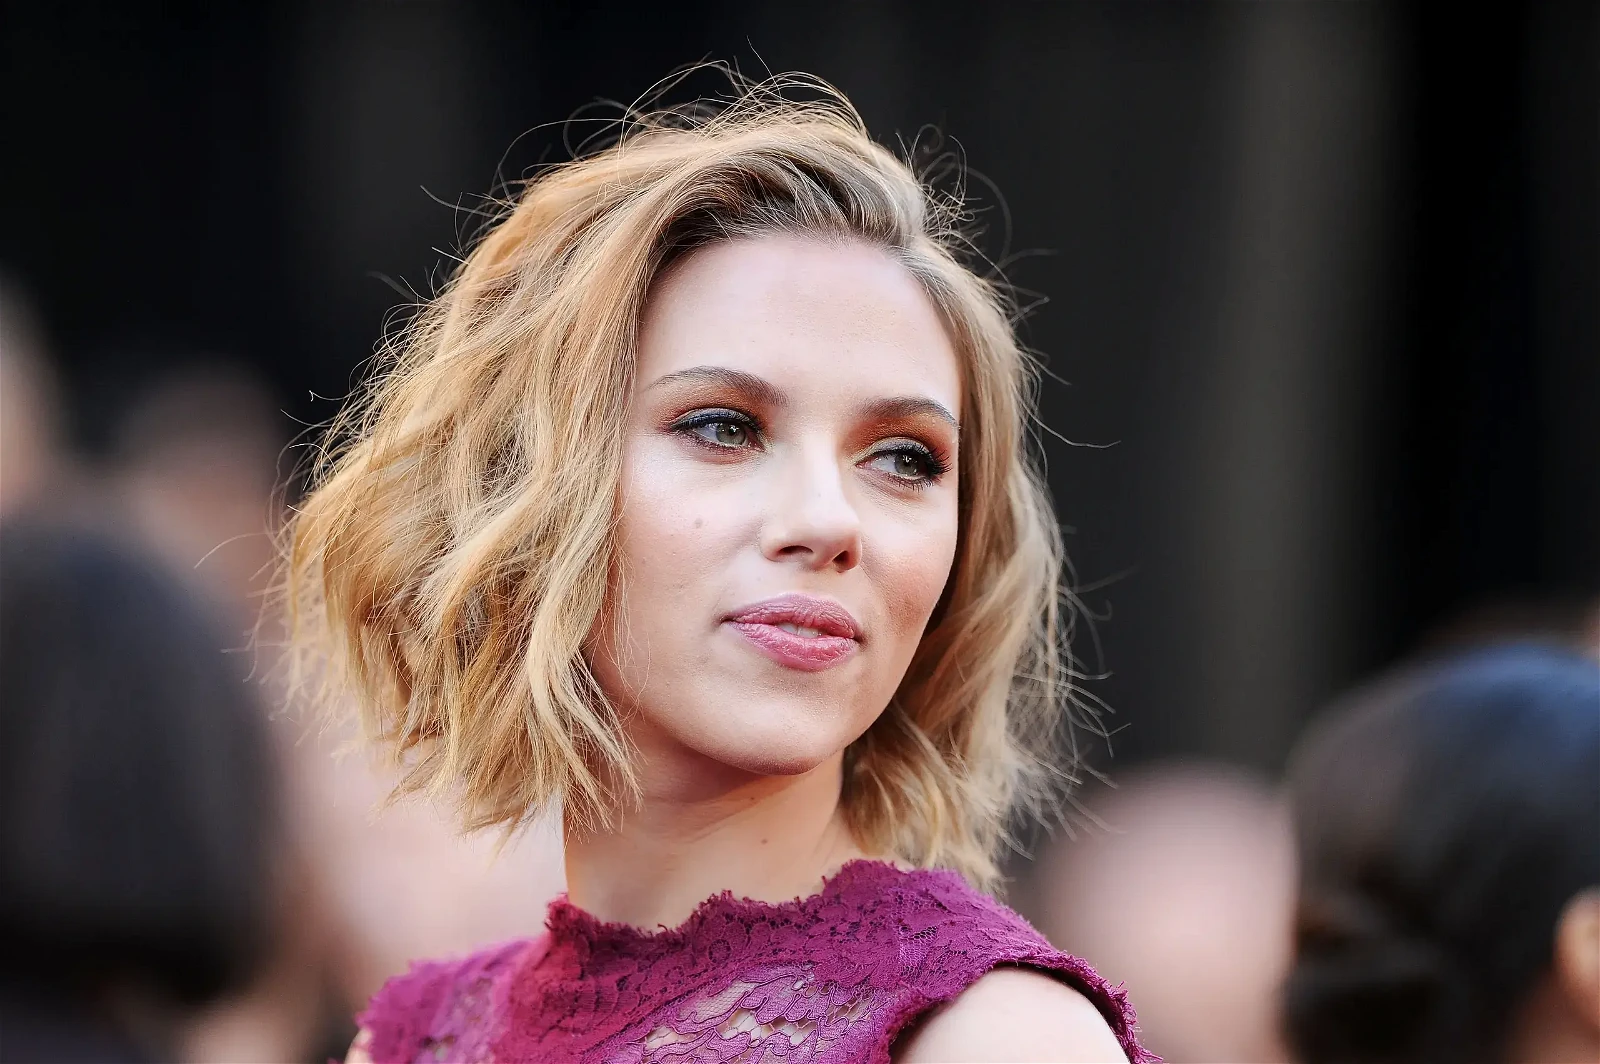 Scarlett Johansson has struggled for years because of her criticism for herself